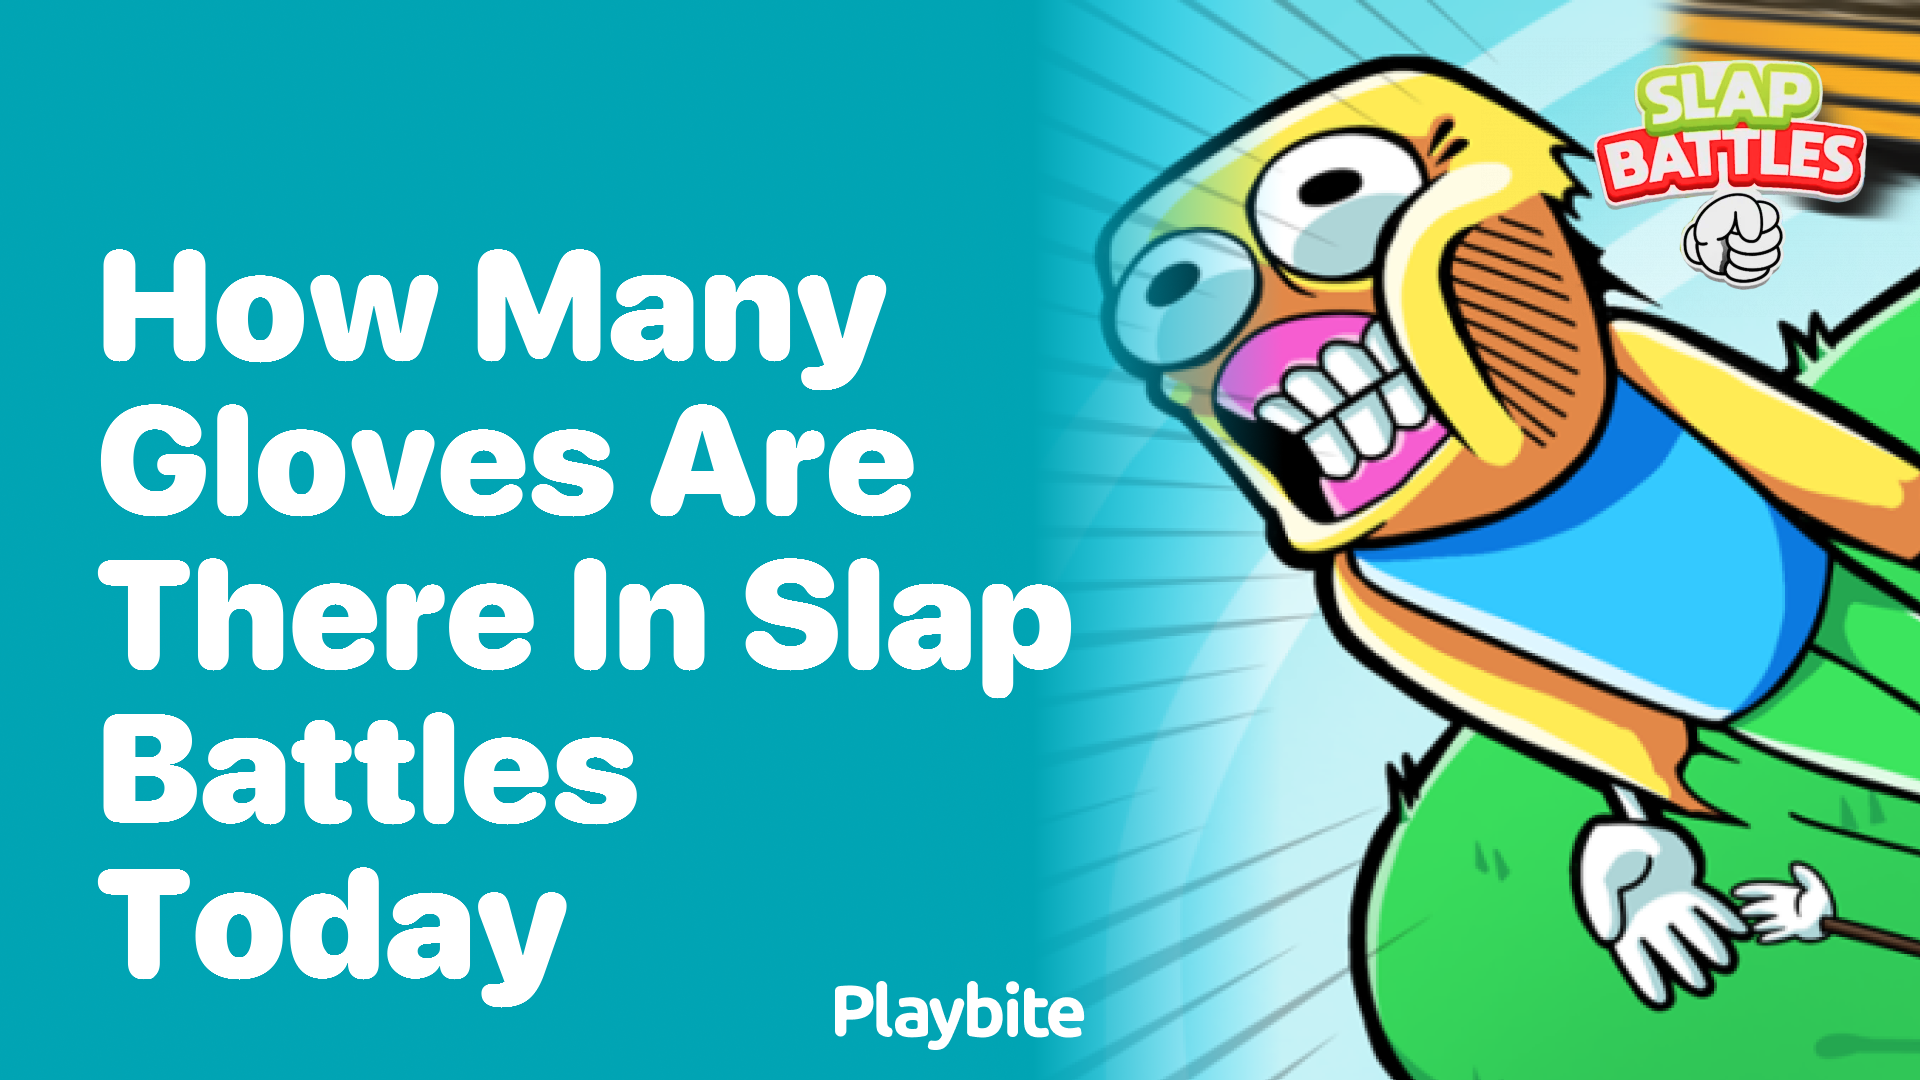 How Many Gloves Are There in Slap Battles Today?